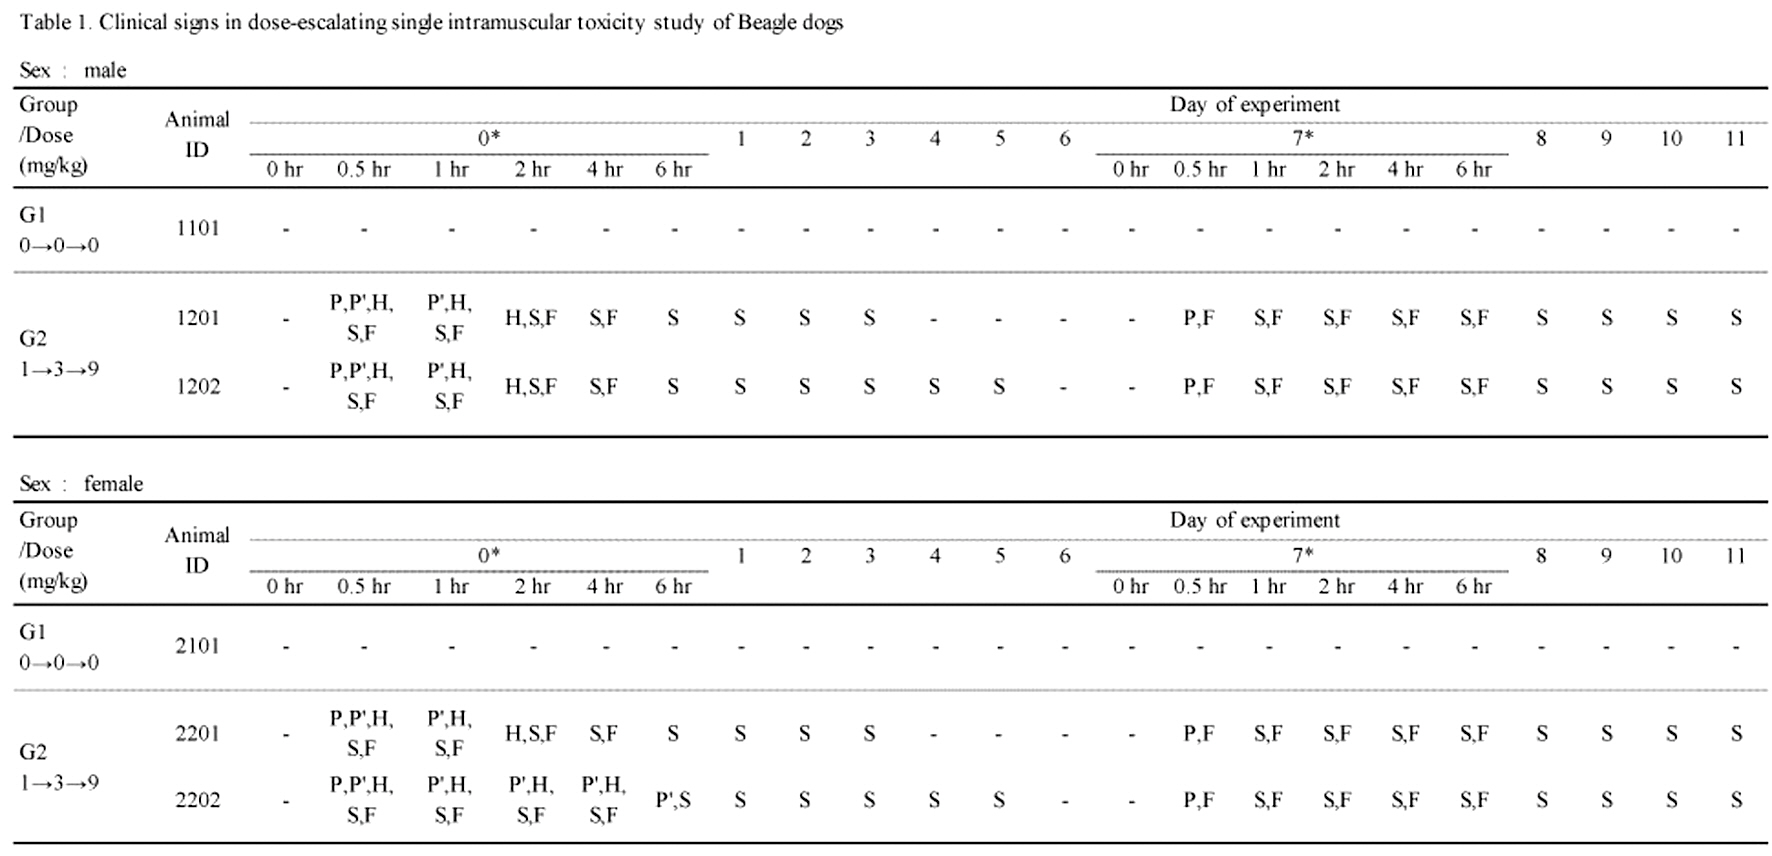 Clinical signs in dose-escalationg single intramuscular toxicity study of Beagle dogs